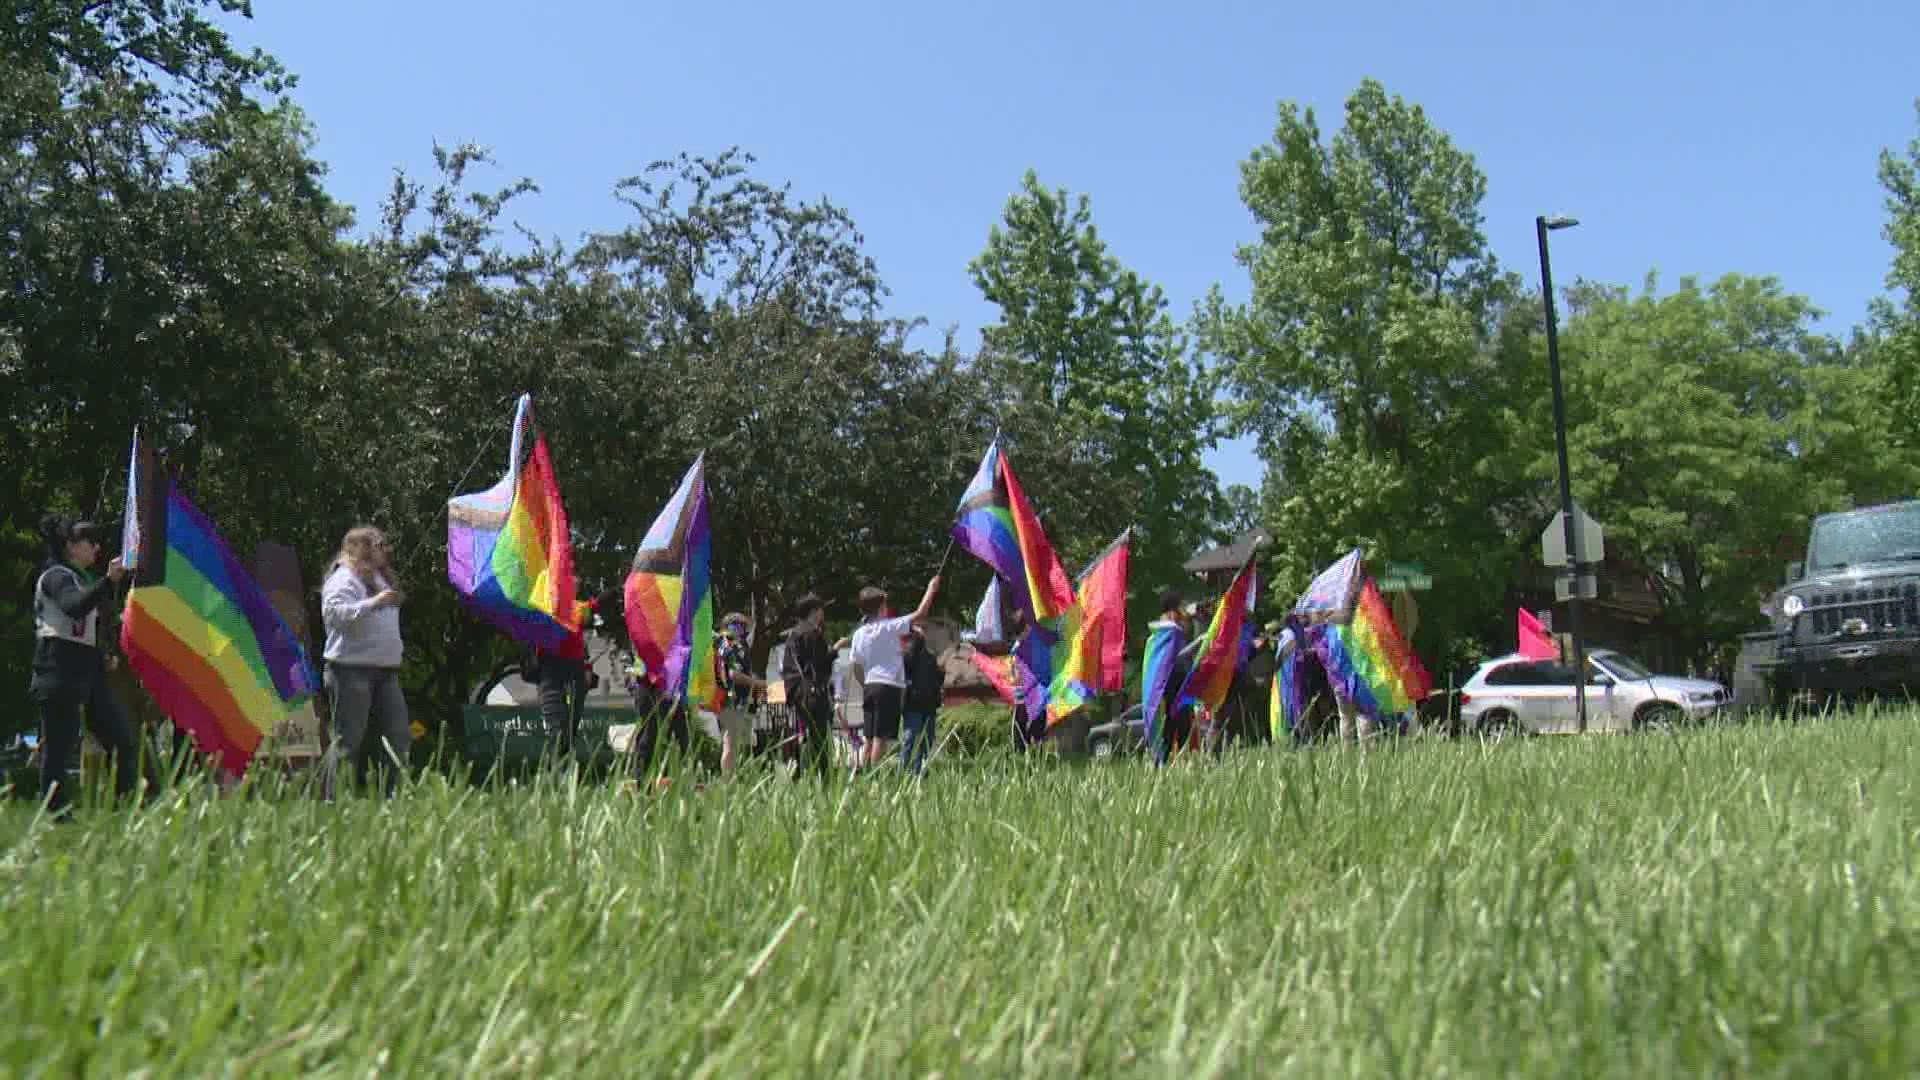 In response to anti-LGBTQ incidents in Idaho within the last week, people around the Treasure Valley are standing together to speak out against the hate.